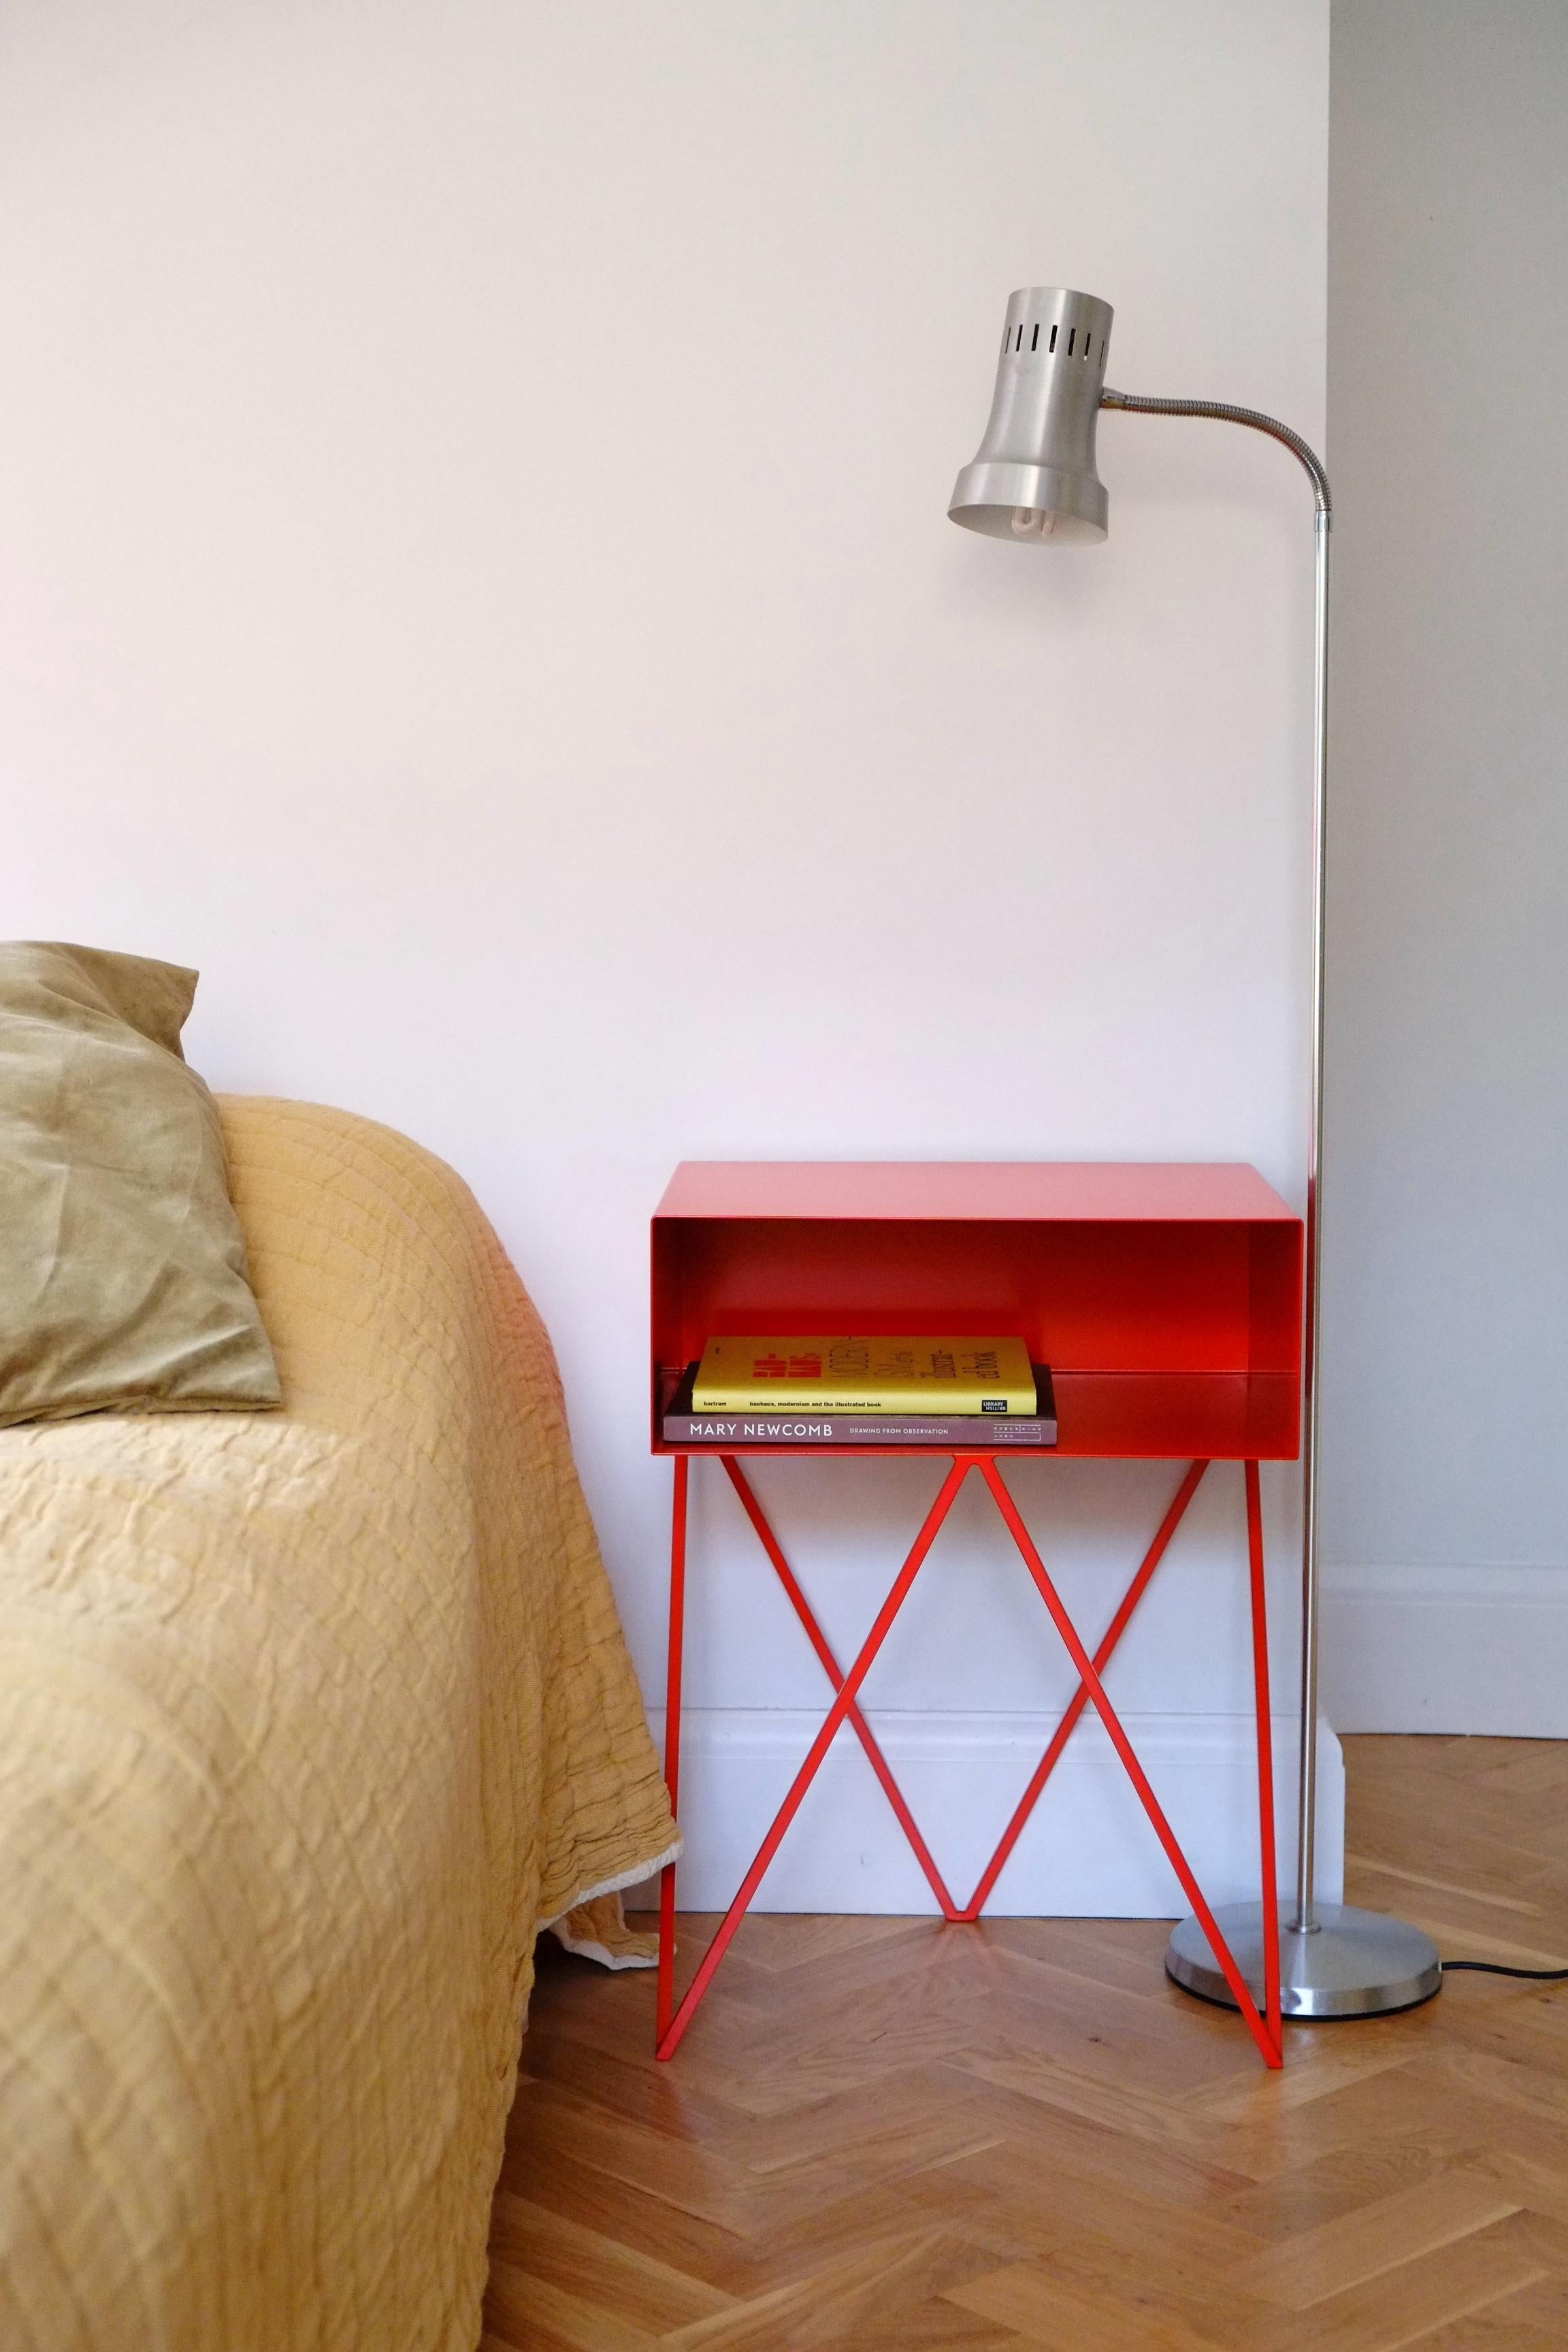 Our all-time best-seller the Robot side table features an open shelf on zig zag legs. A fun and functional design made of solid steel, powder-coated in gorgeous red. The clean lines look great against period details as well as in modern spaces.